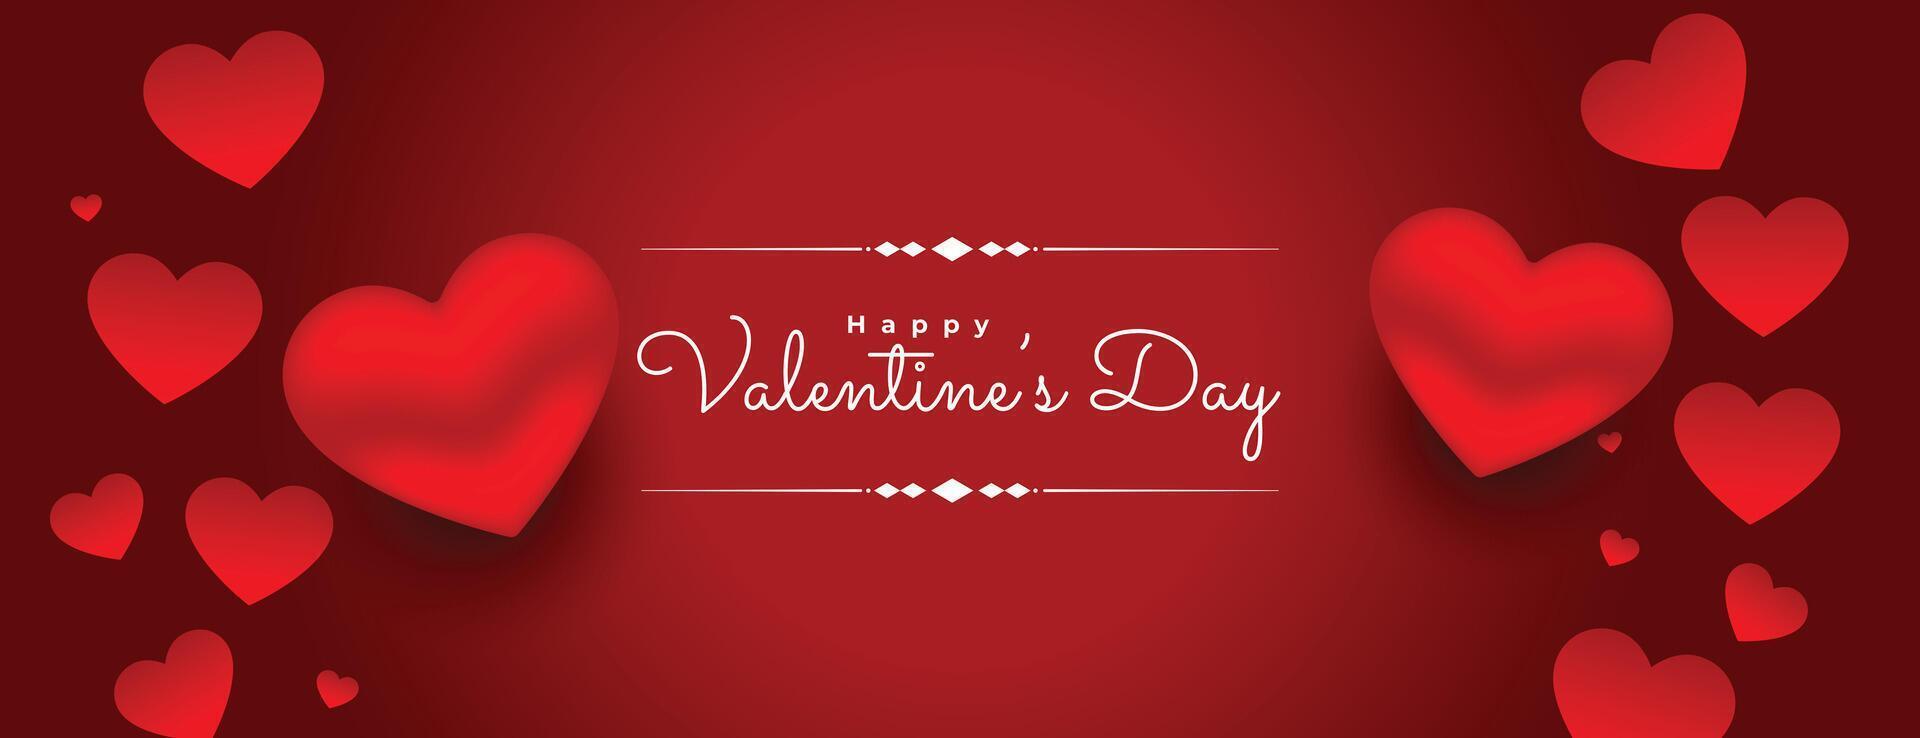 3d valentines day red hearts background design vector